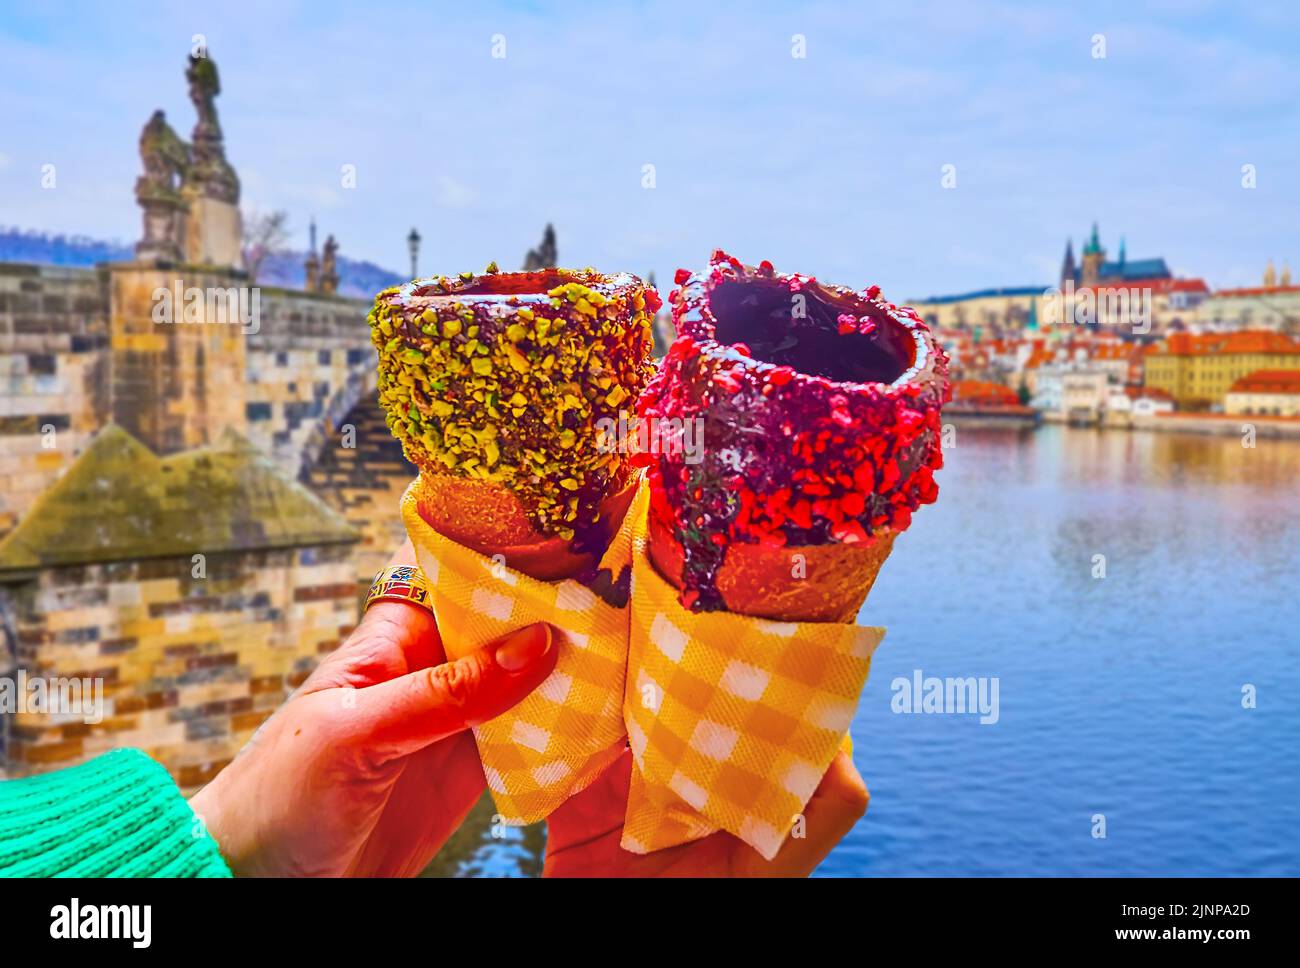 Traditional Czech trdelnik spit cake, covered with chocolate and dry berries in front of Vltava River and stone sculptured Charles Bridge, Prague, Cze Stock Photo